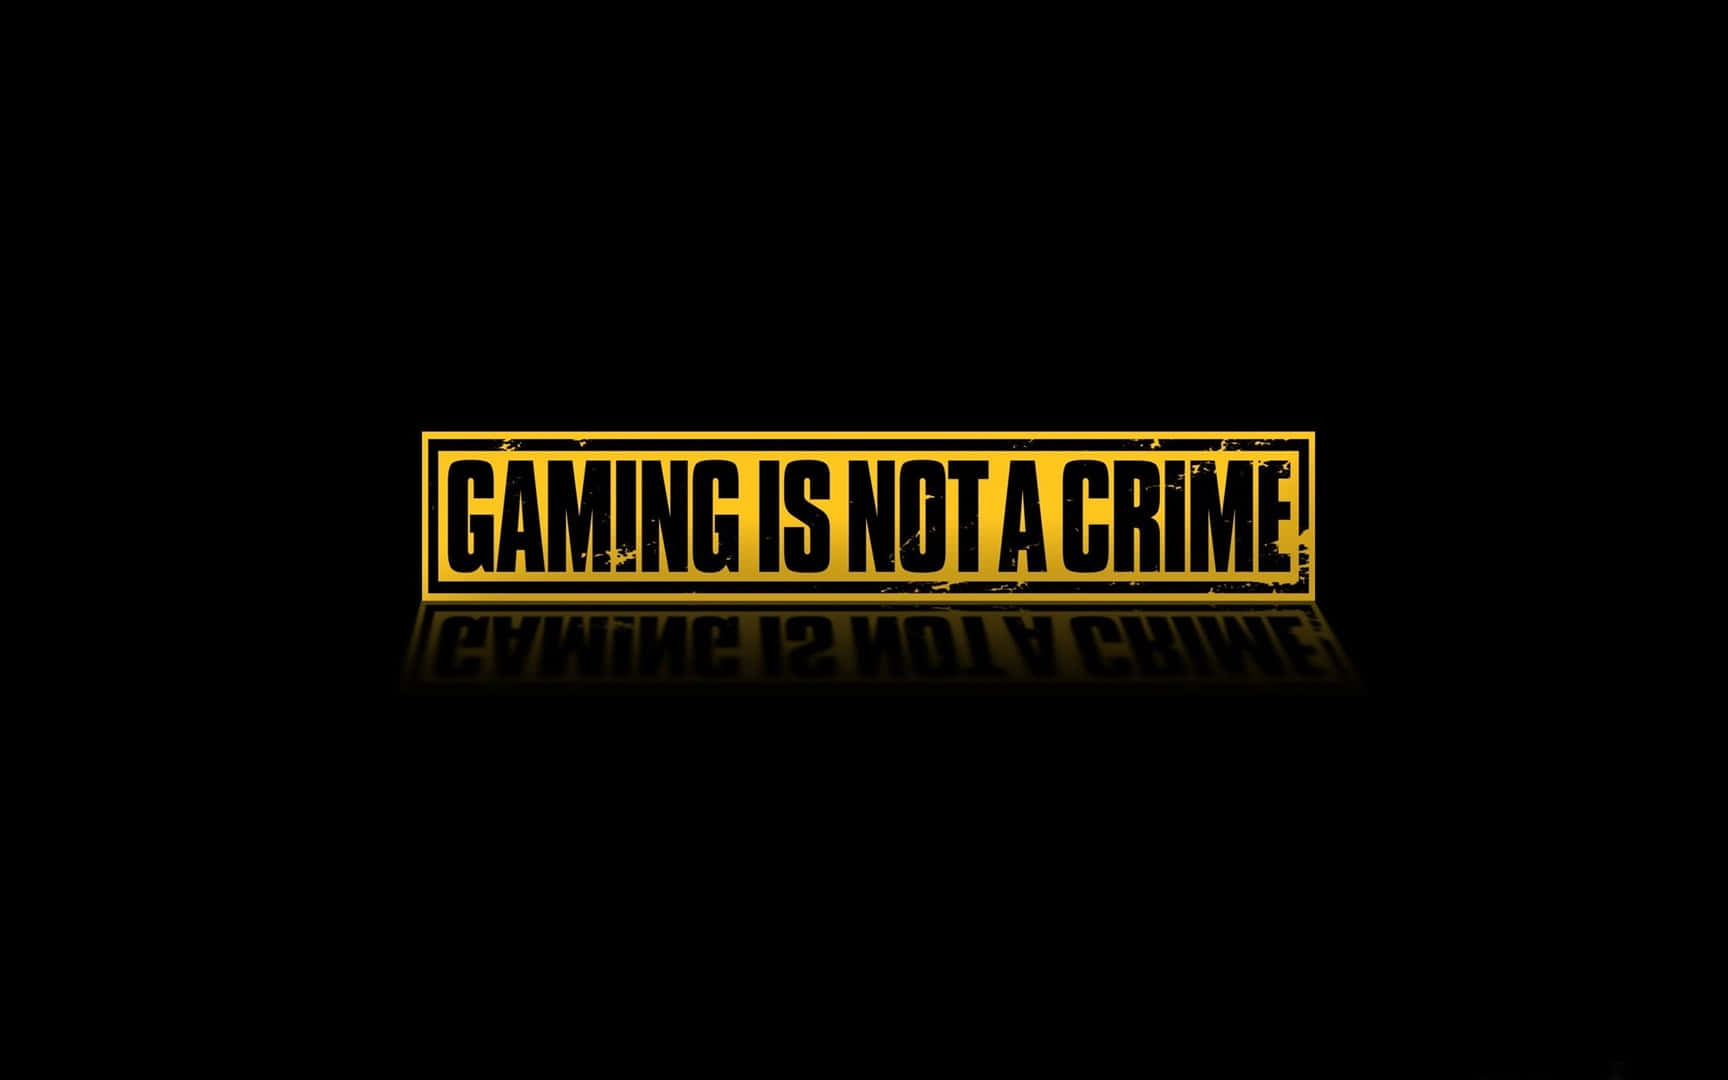 Awesome Hd Gaming Gaming Not A Crime Wallpaper